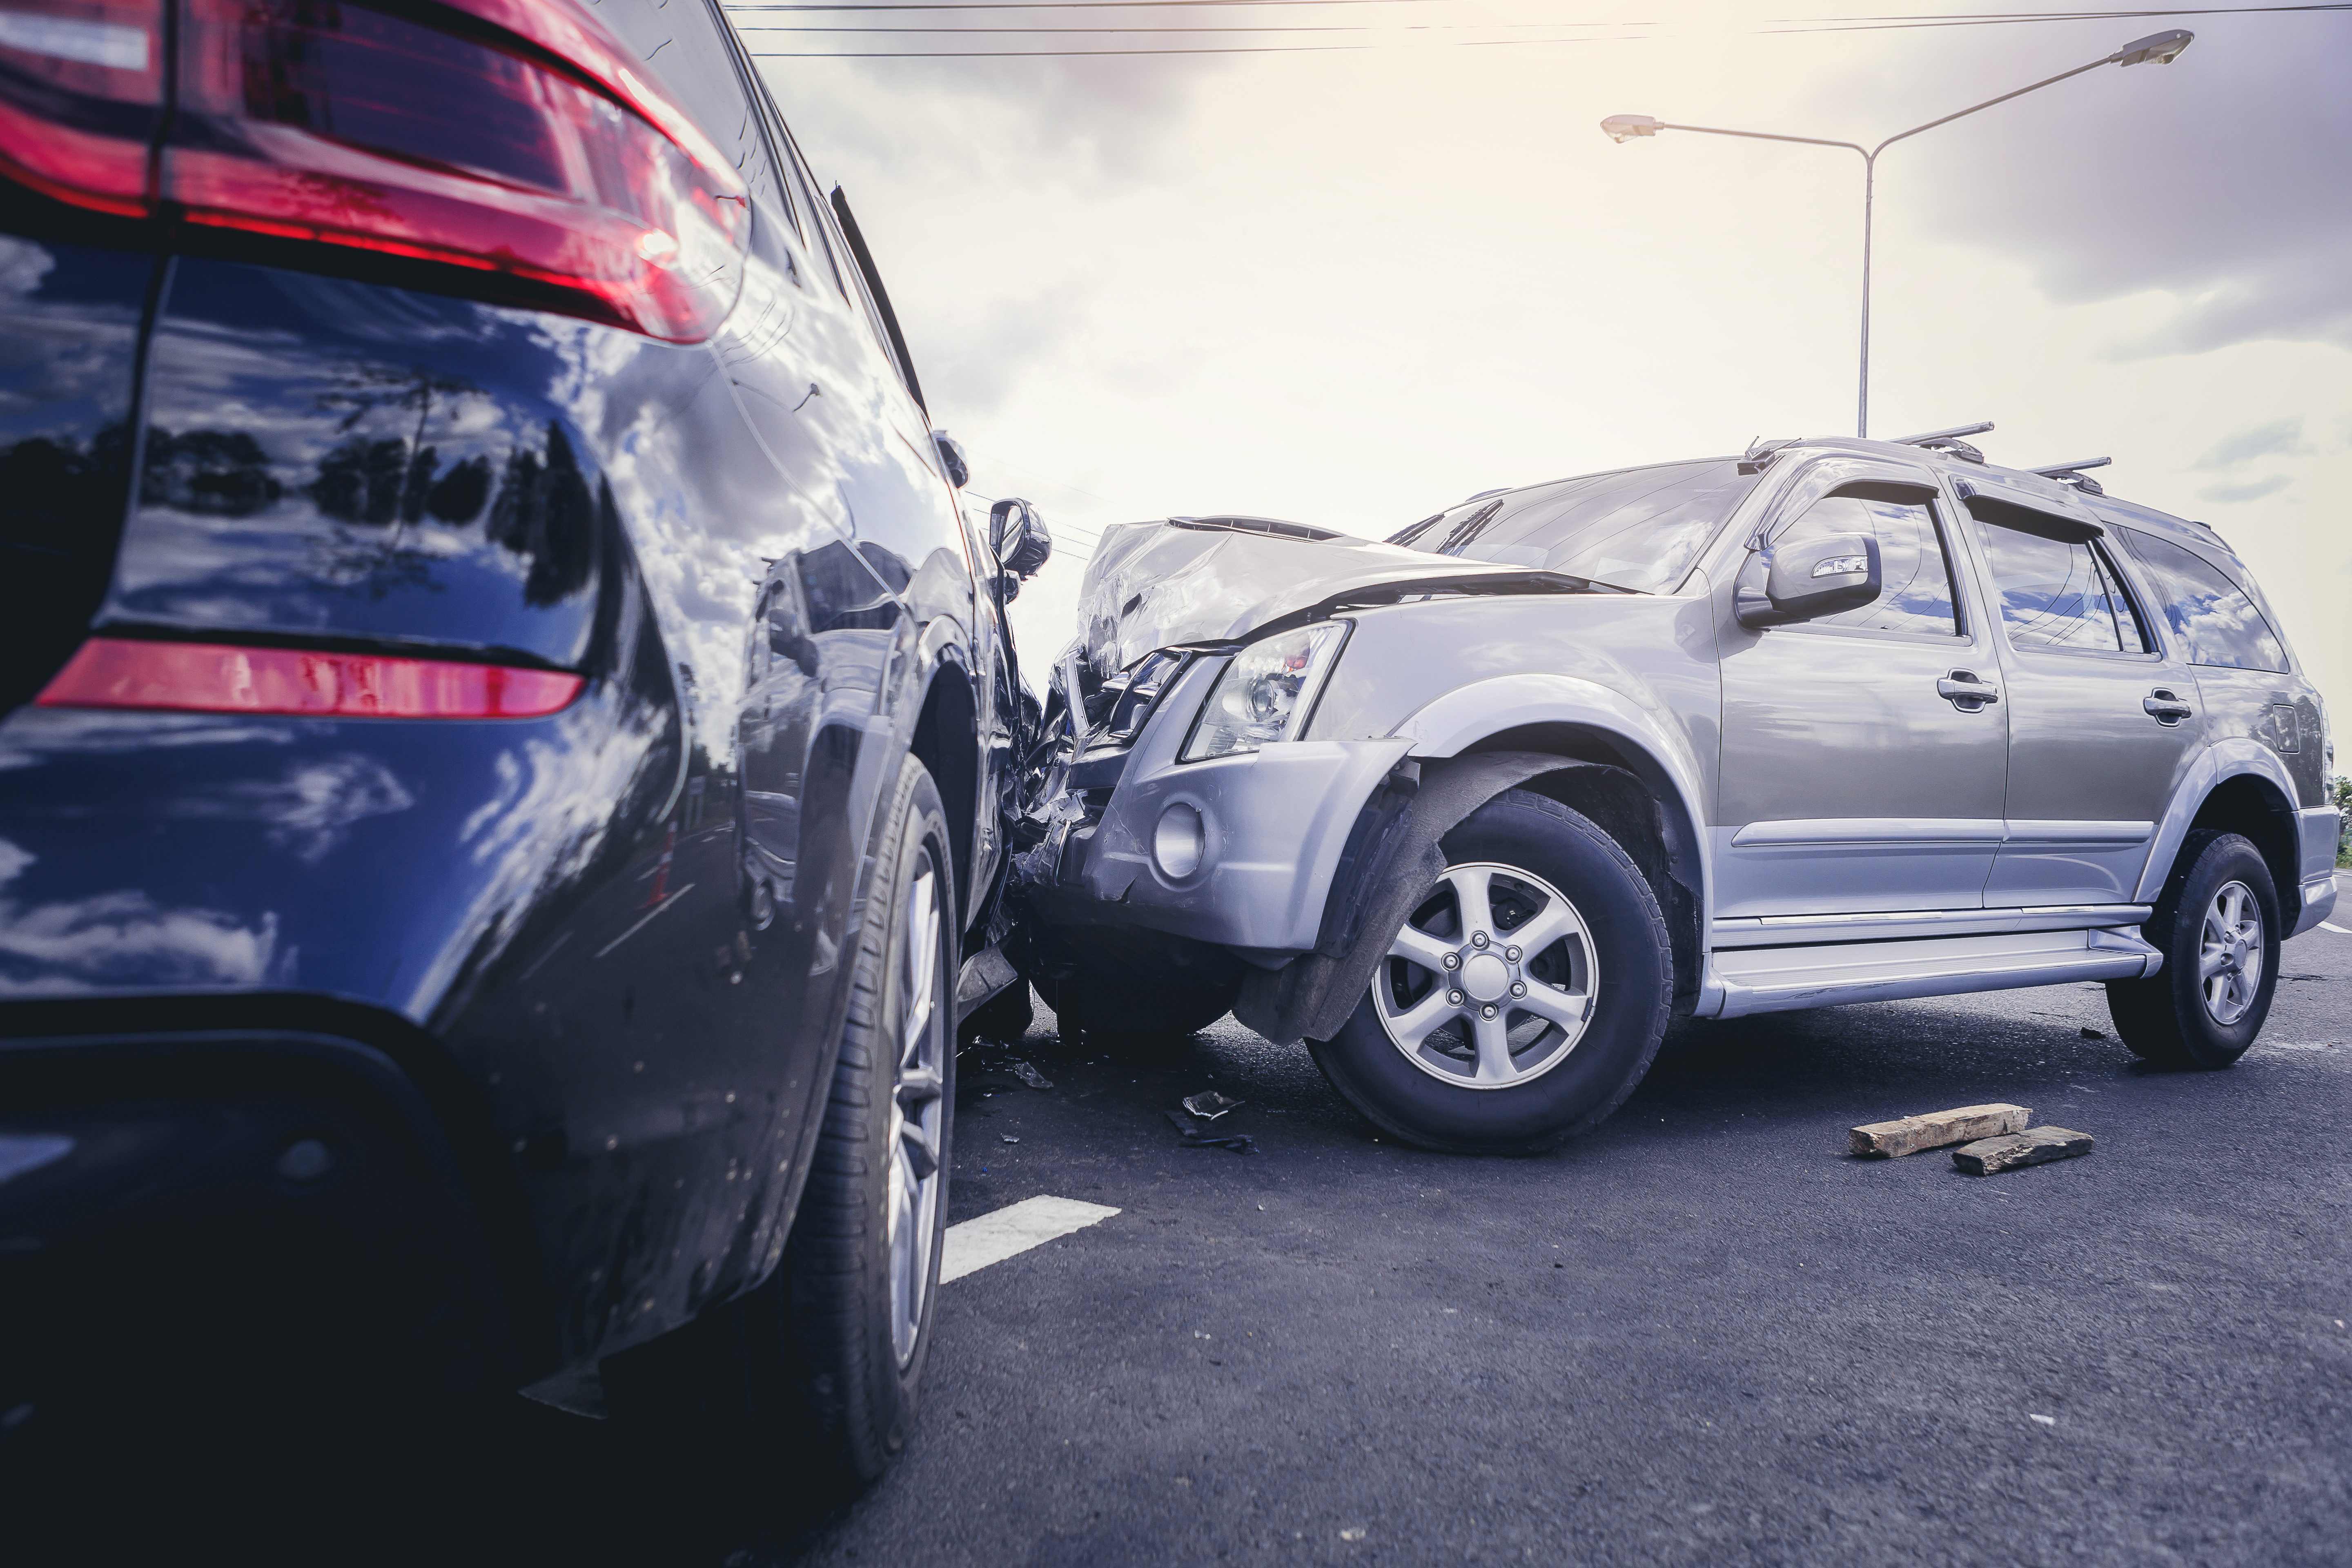 KHKS: Auto accident lawyers and attorneys